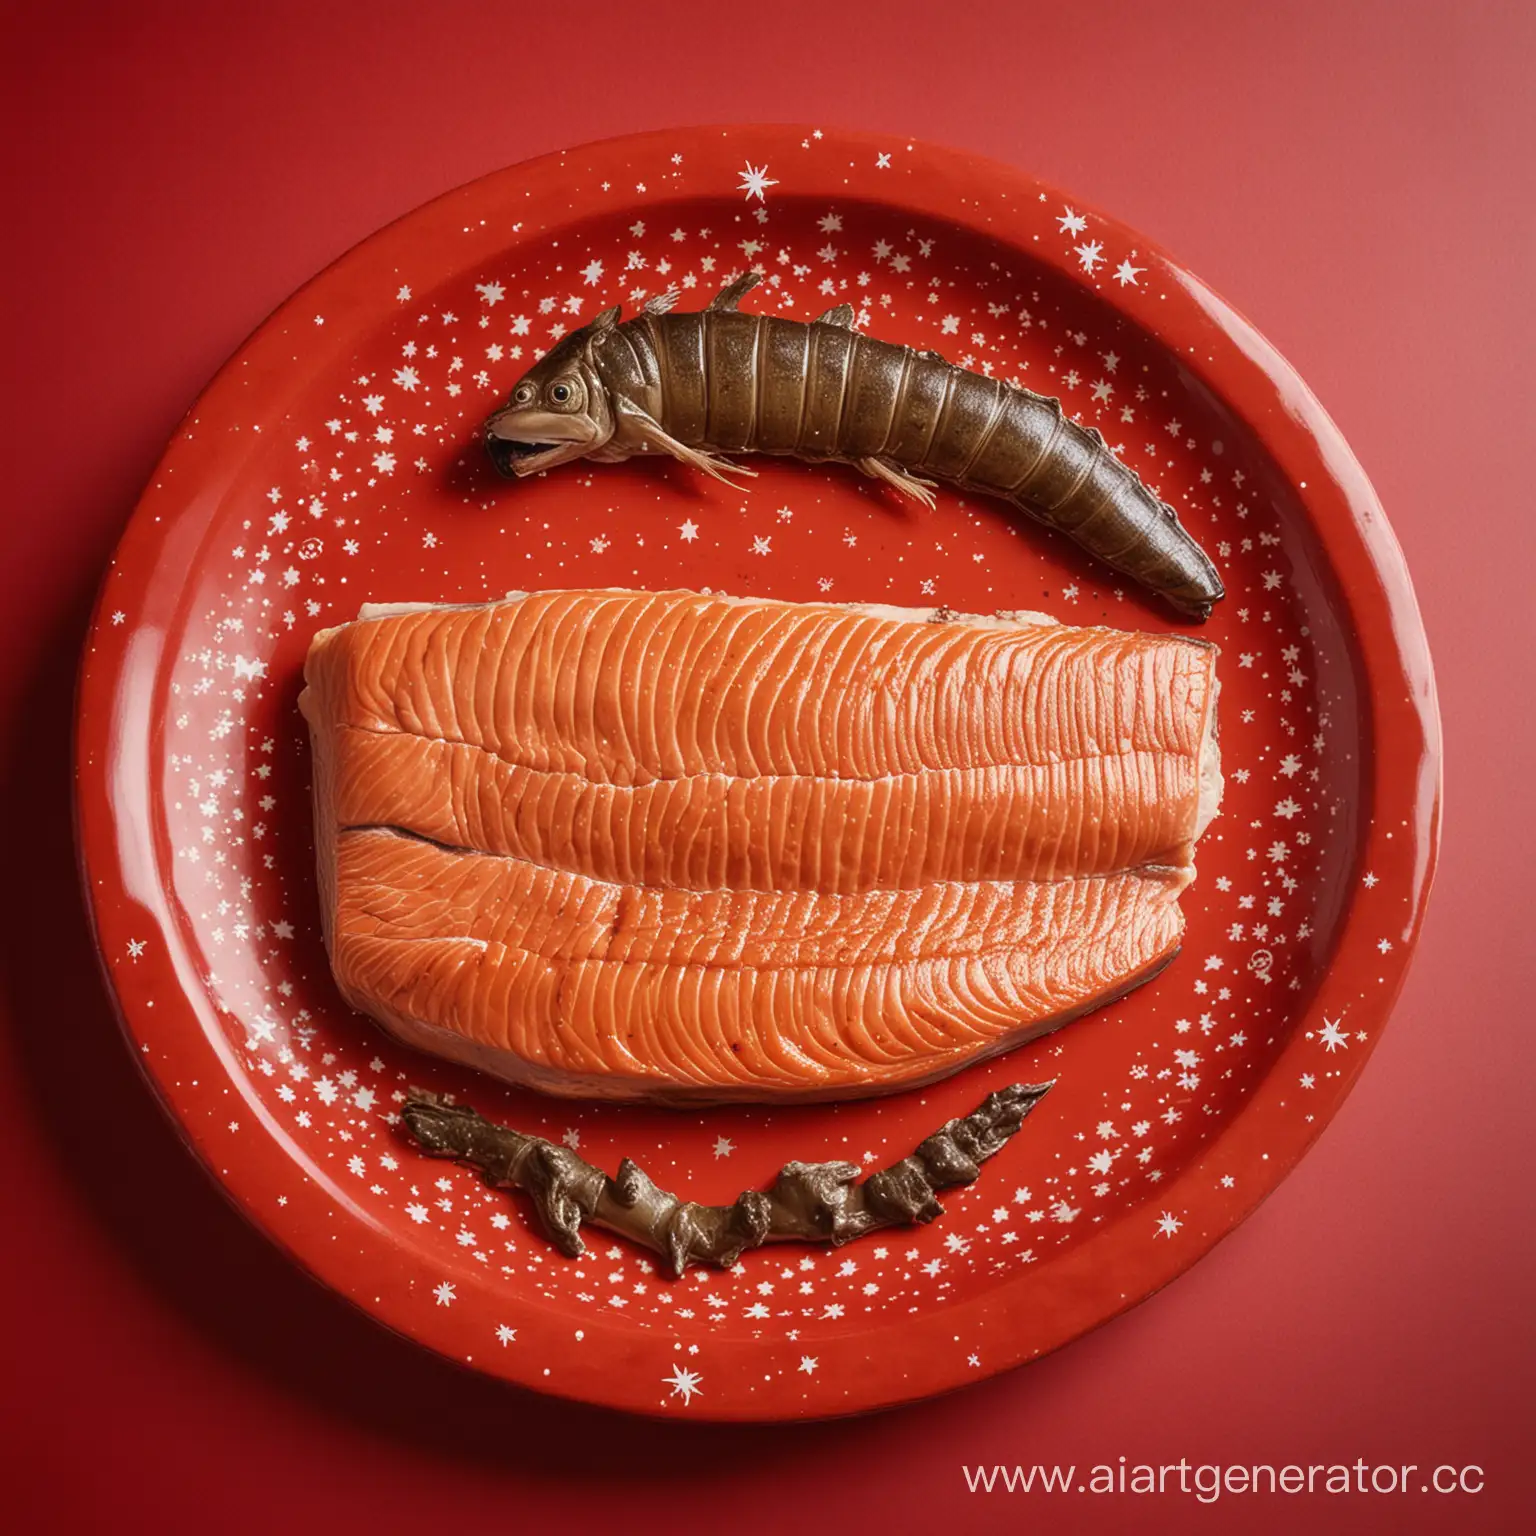 Bizarre-Culinary-Creation-Salmon-with-Monkey-Legs-and-Deer-Hoof-on-a-Starry-Red-Plate